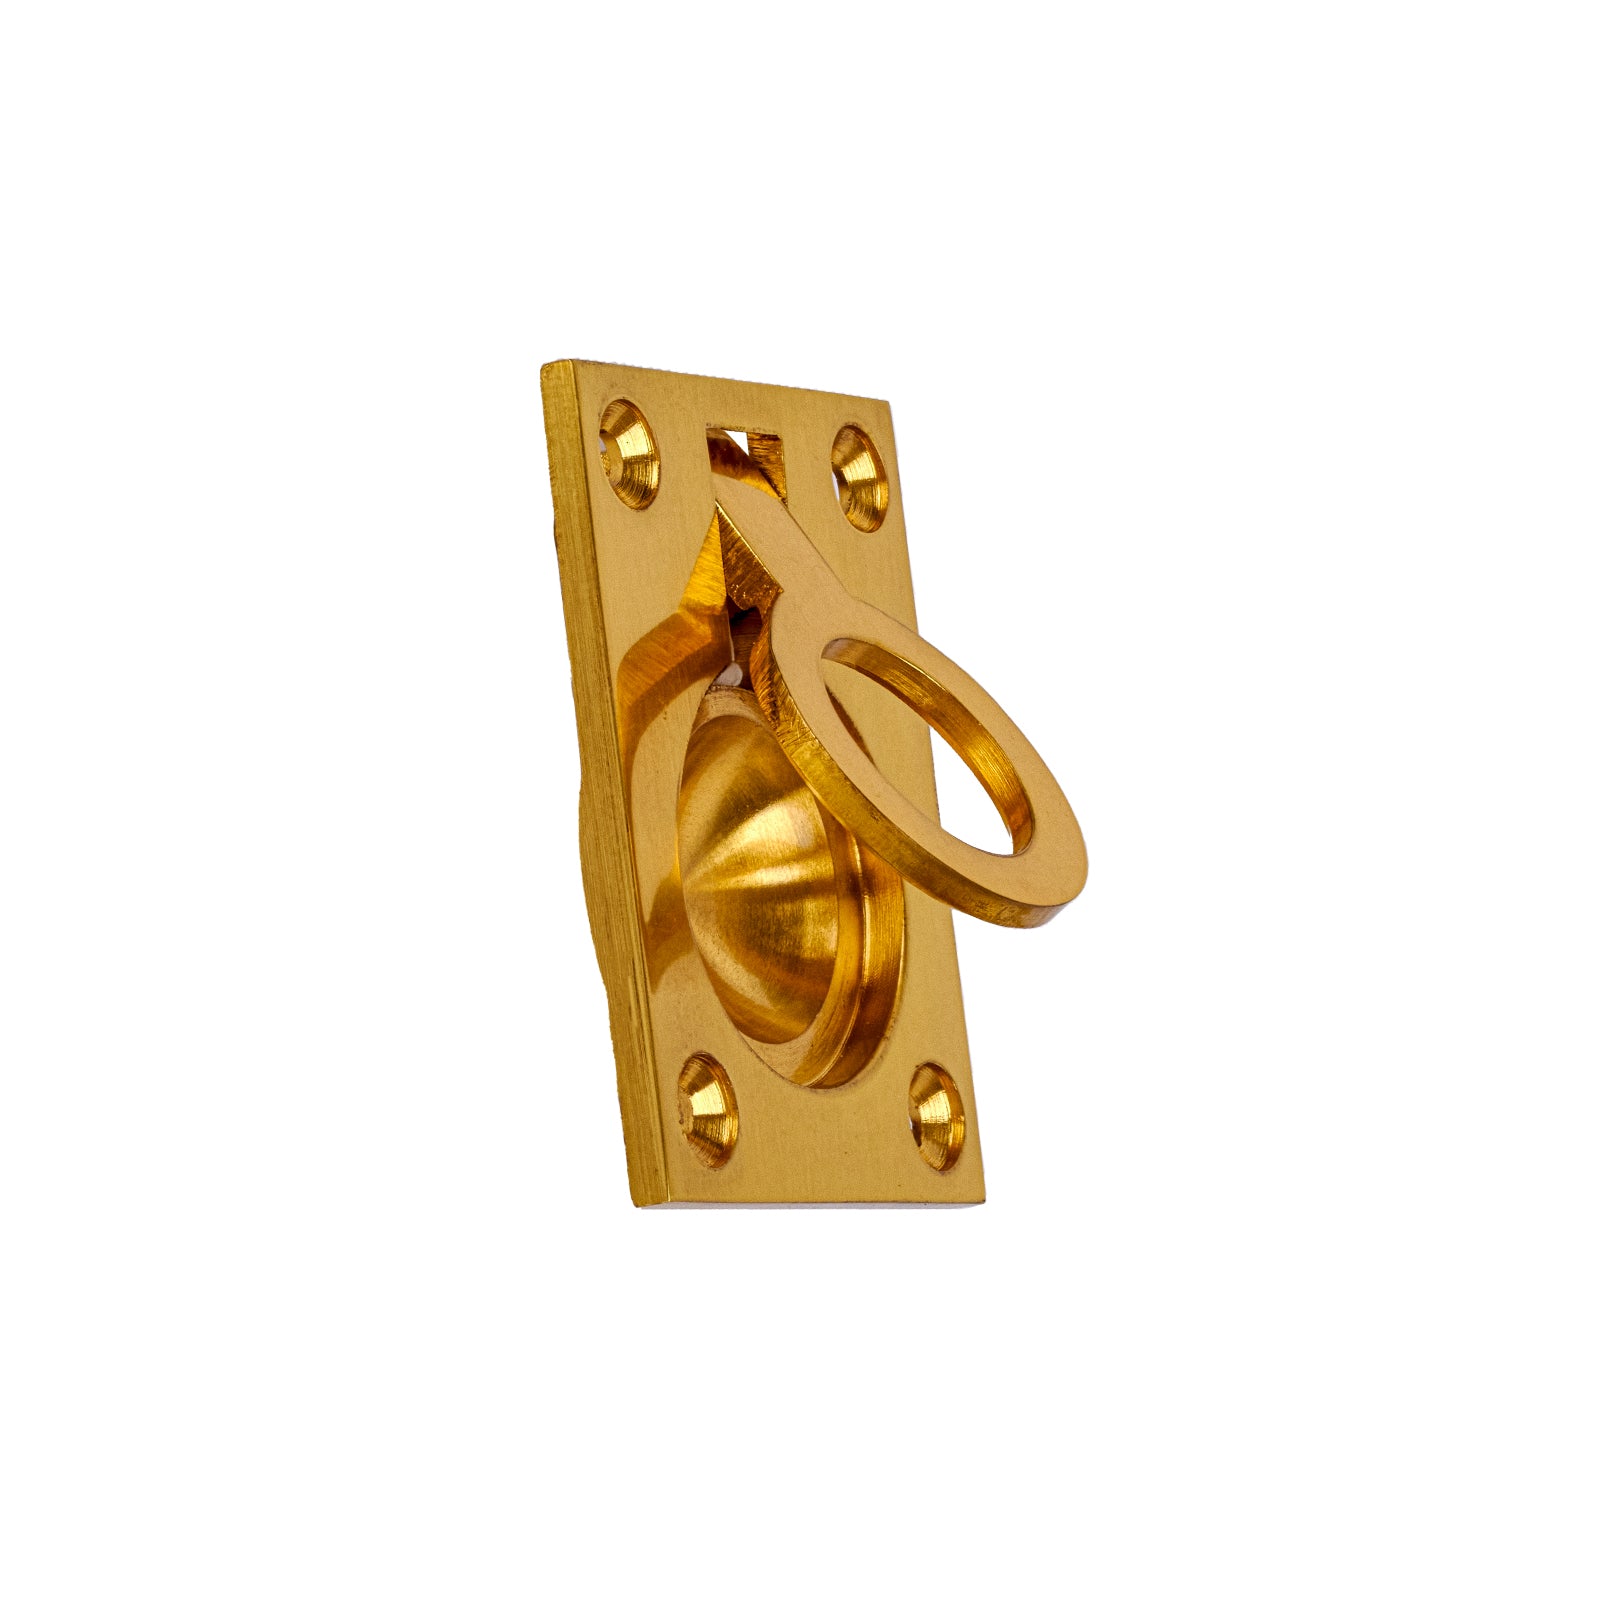 Polished brass flush ring cabinet pull handle SHOW